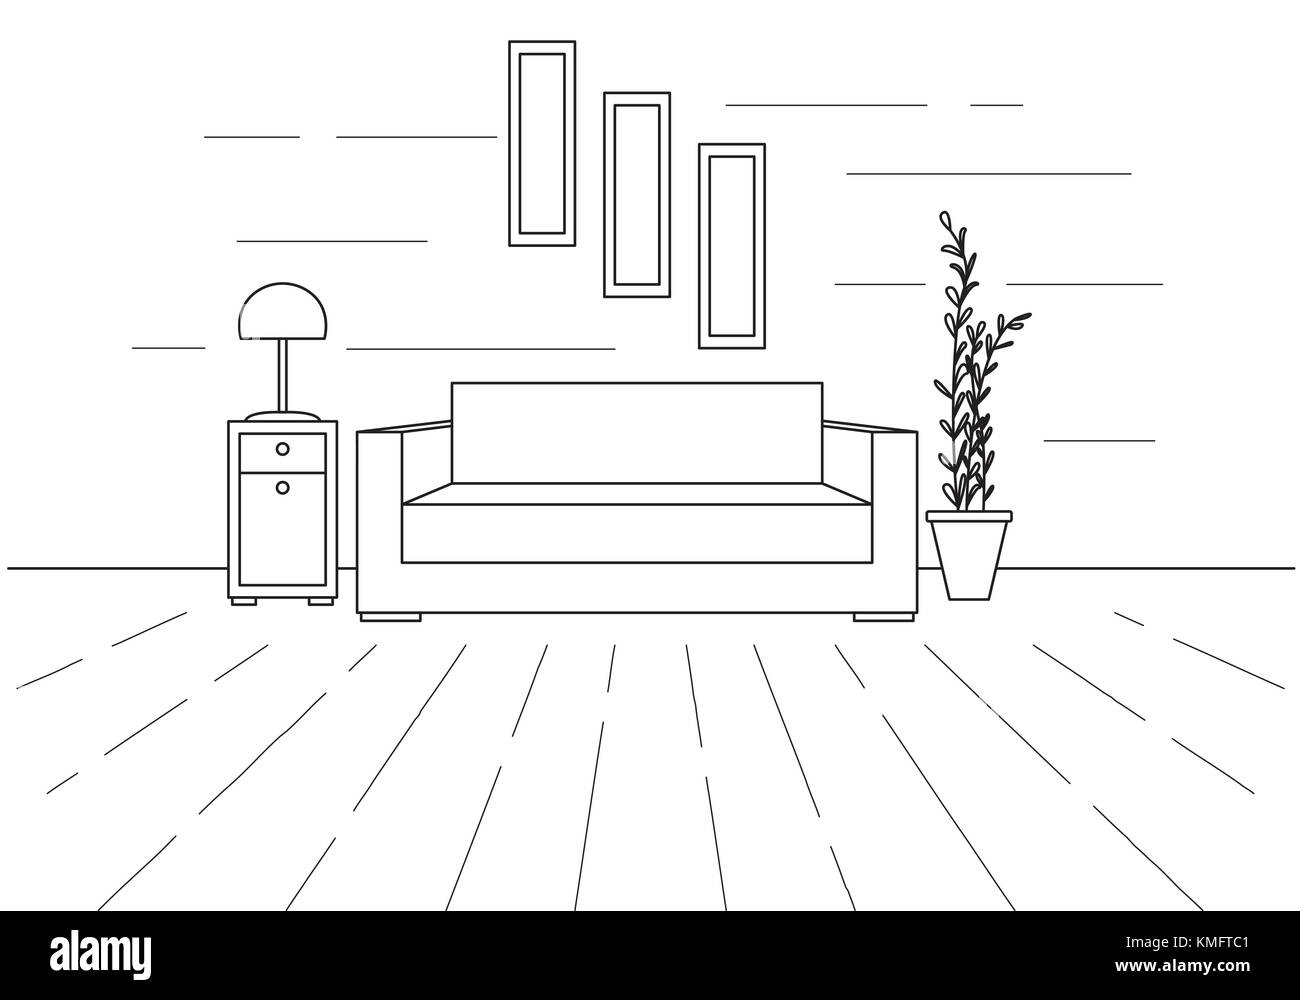 Modern interior. Sofa, floor lamp and bedside table. The clock hangs on the wall. In front of the sofa is a carpet. Vector illustration in a linear st Stock Vector